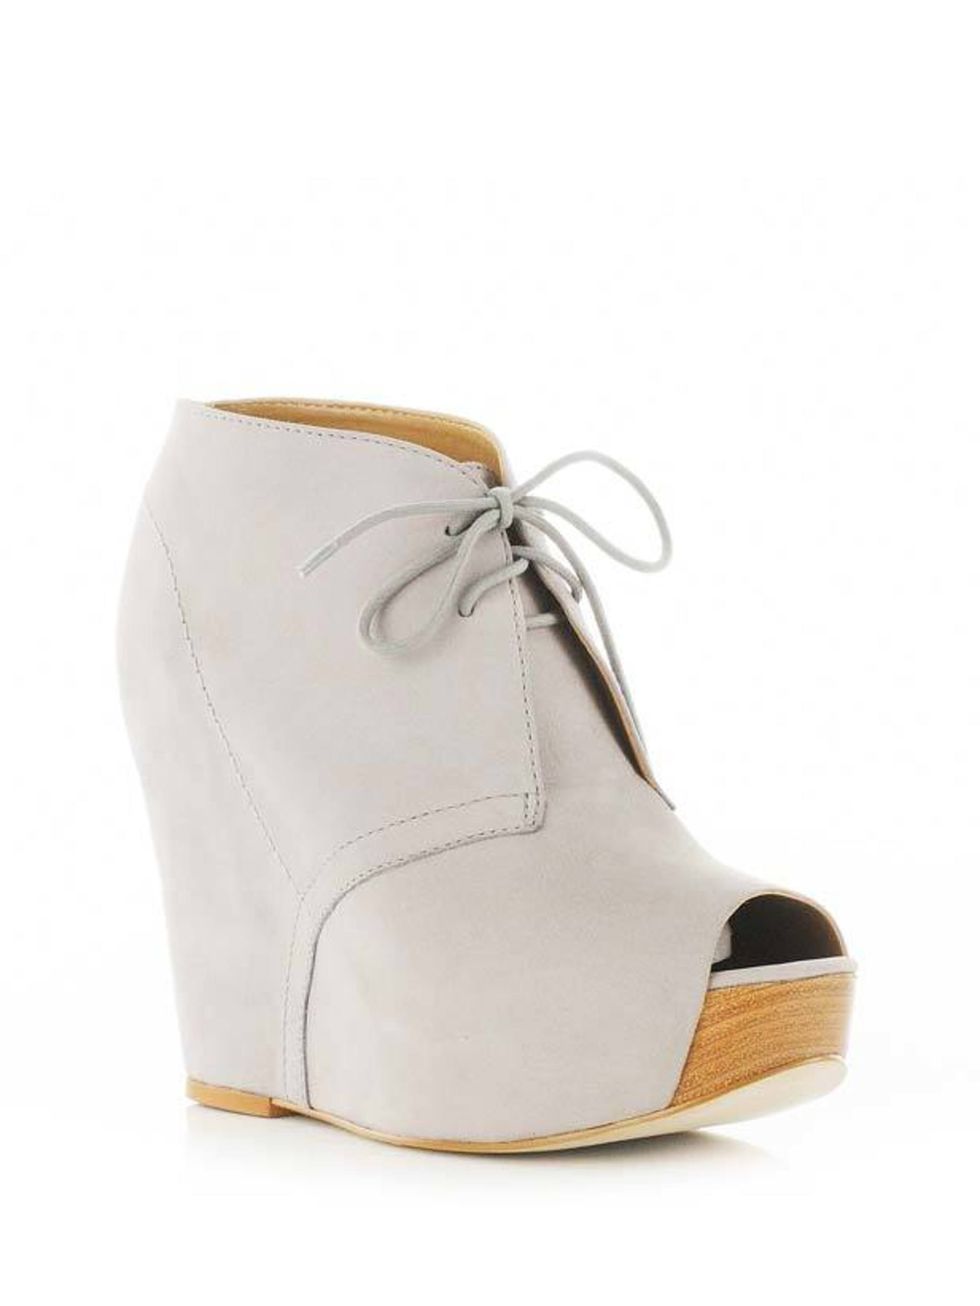 <p><a href="http://www.riverisland.com/Online/women/shoes--boots/heels--wedges/grey-lace-up-wedges--598595">River Island</a> peep-toe wedge boots, £74.99</p>